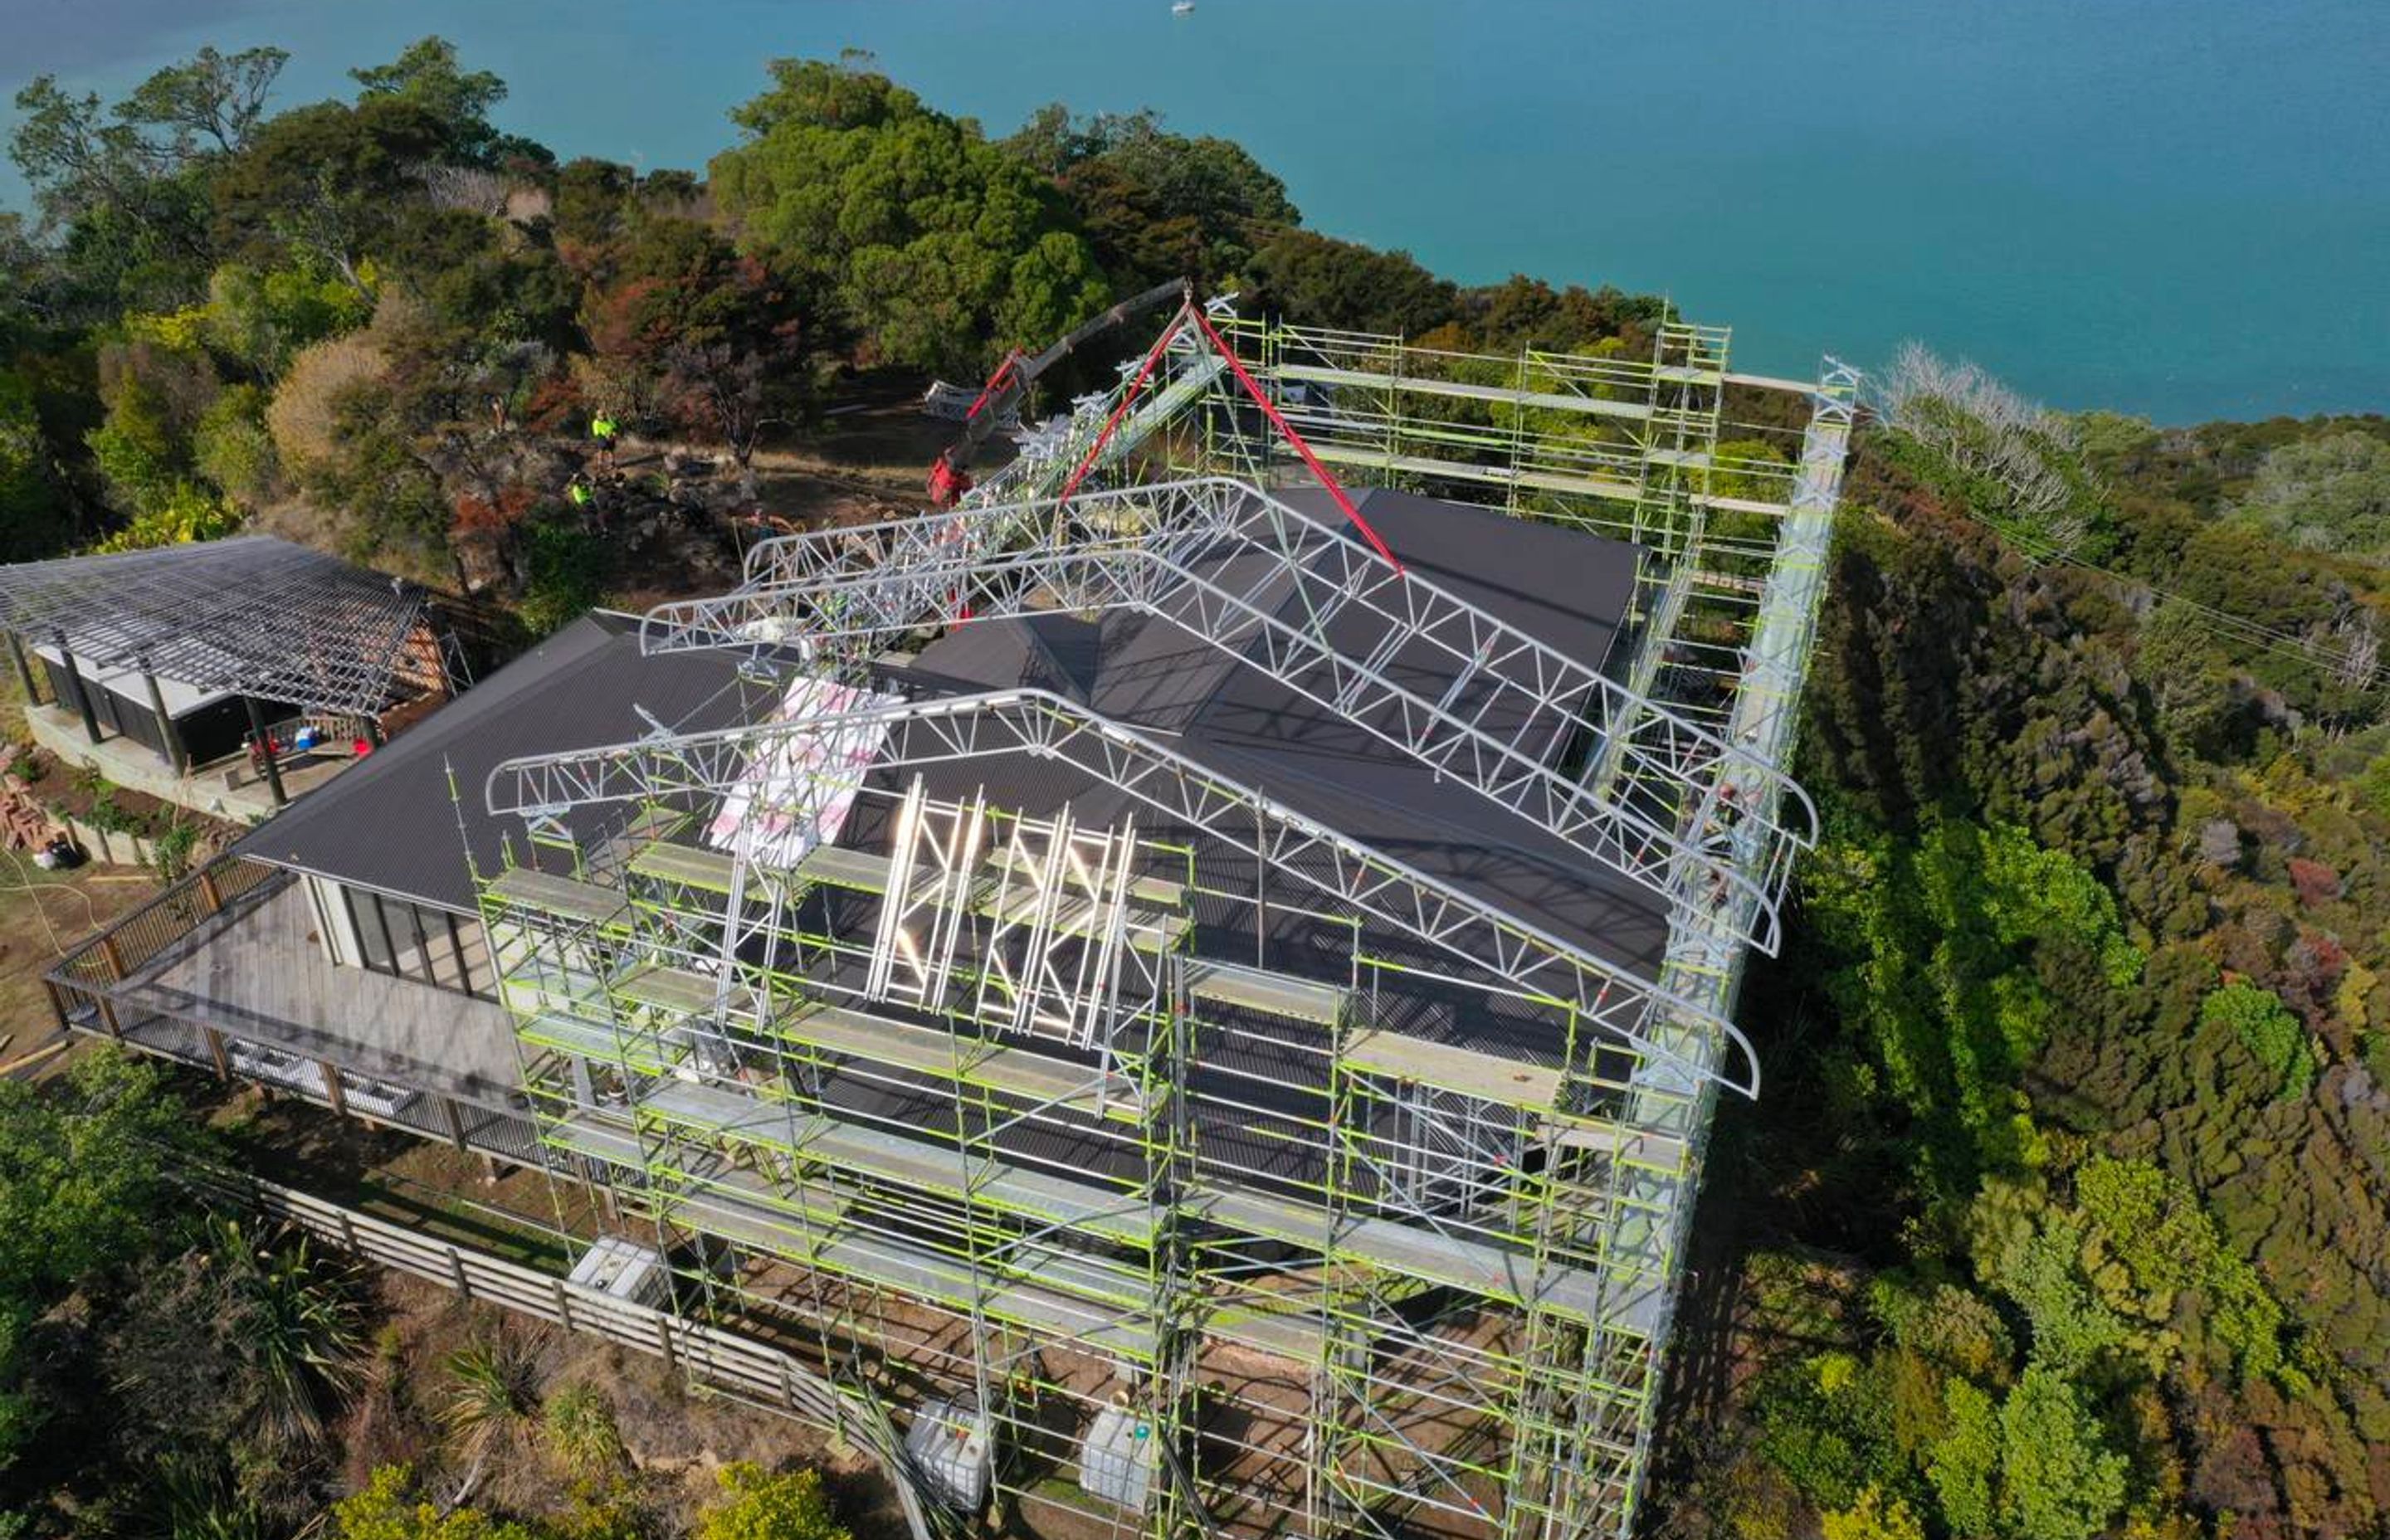 Removing the Layer Keder Roof and Scaffolding structure.  The sheets of the Layer Keder (PVC sheet tarpaulin) system have been removed and can be re-used.